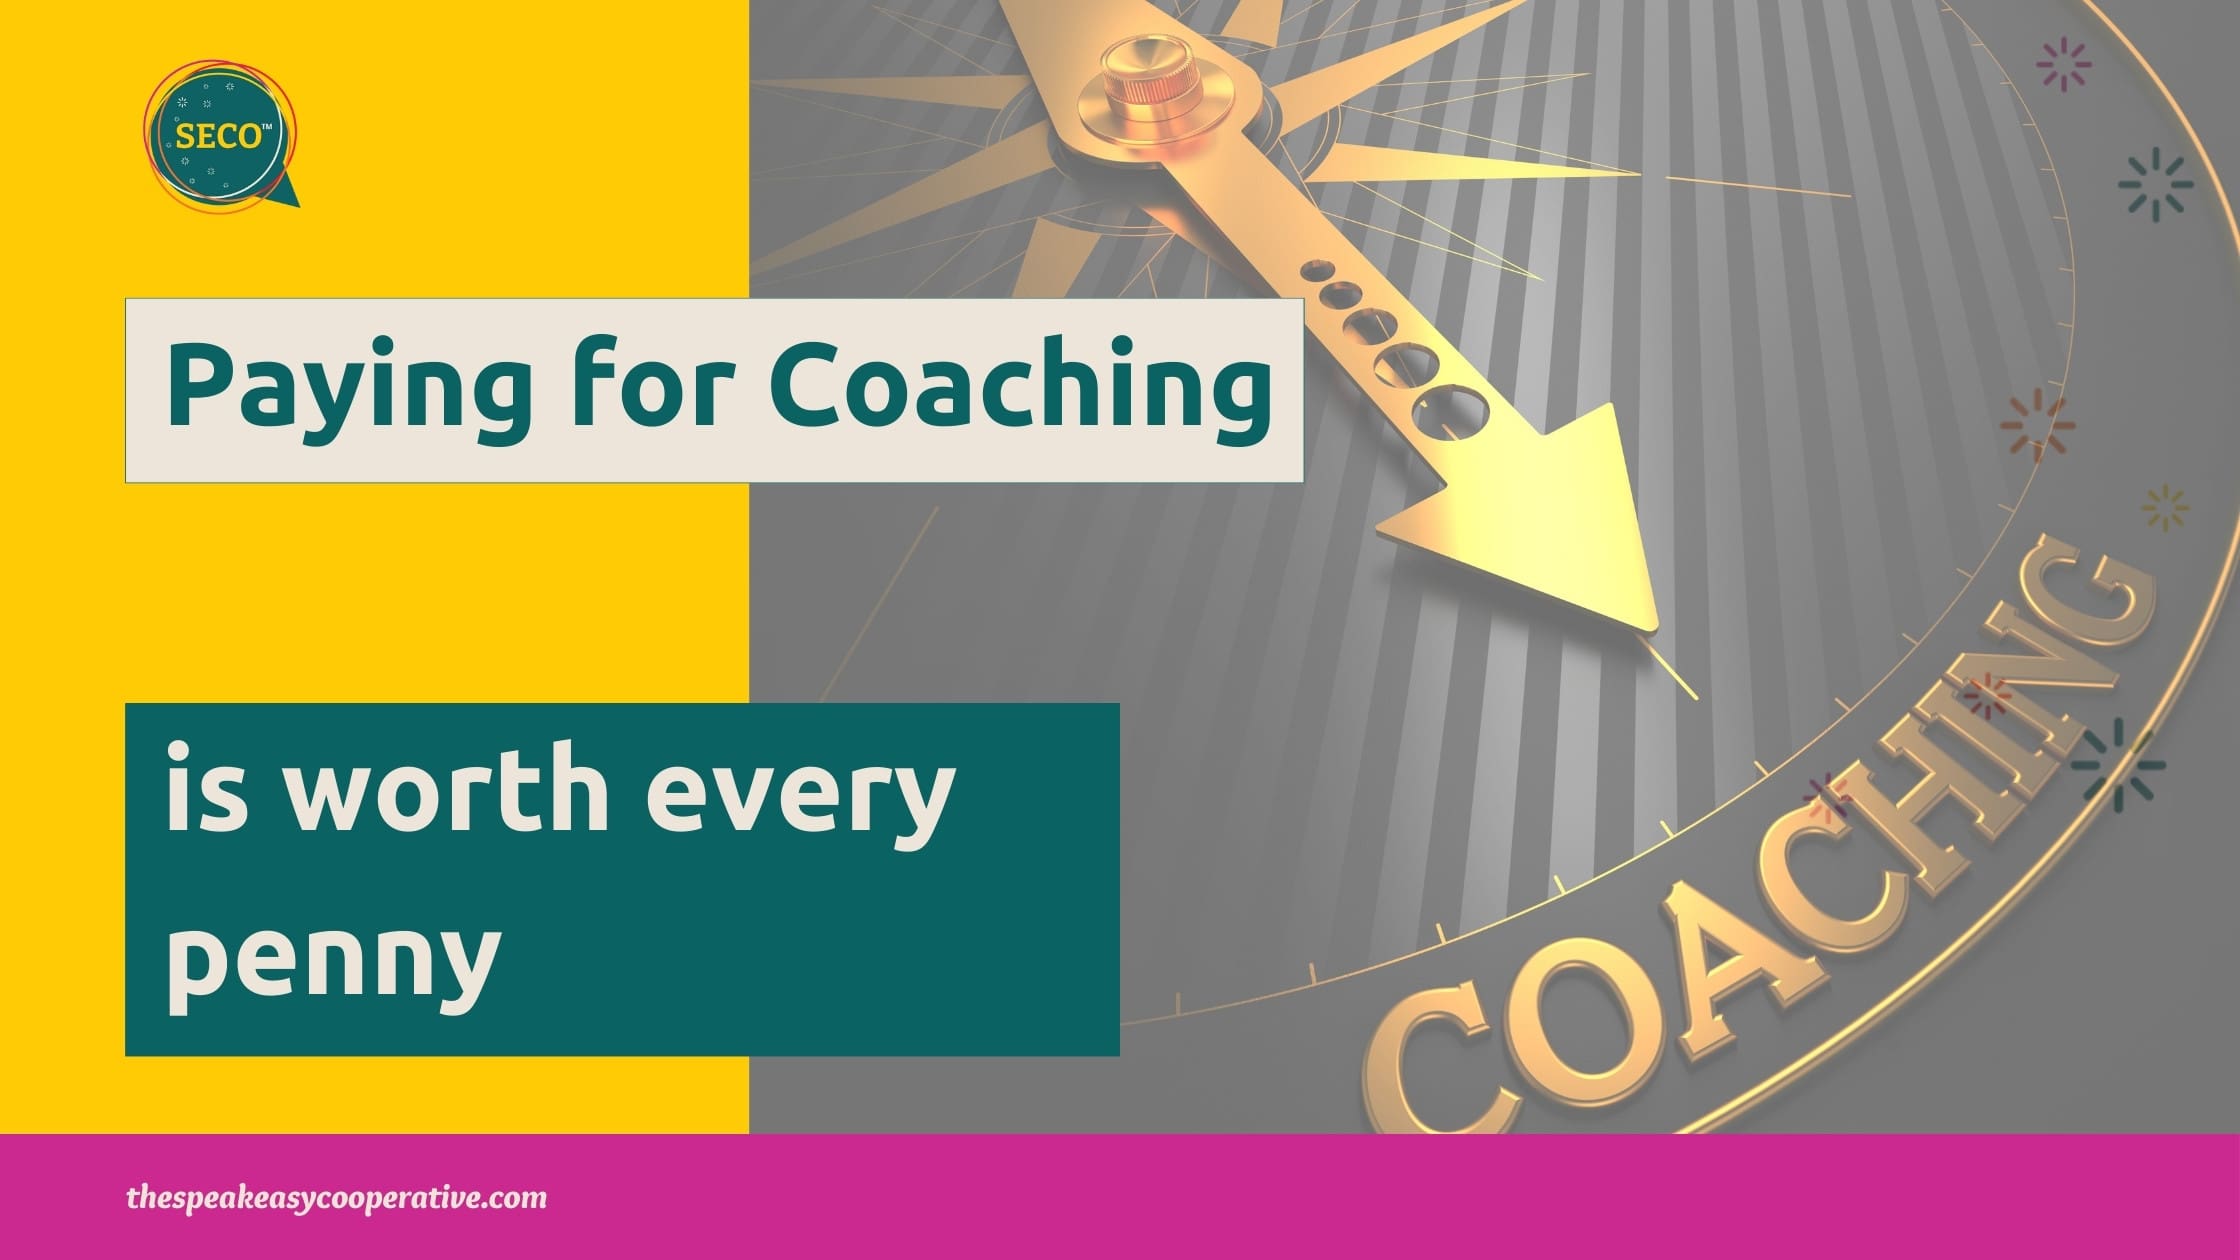 A golden compass points toward the word "Coaching". The title reads, "Paying for coaching is worth every penny".